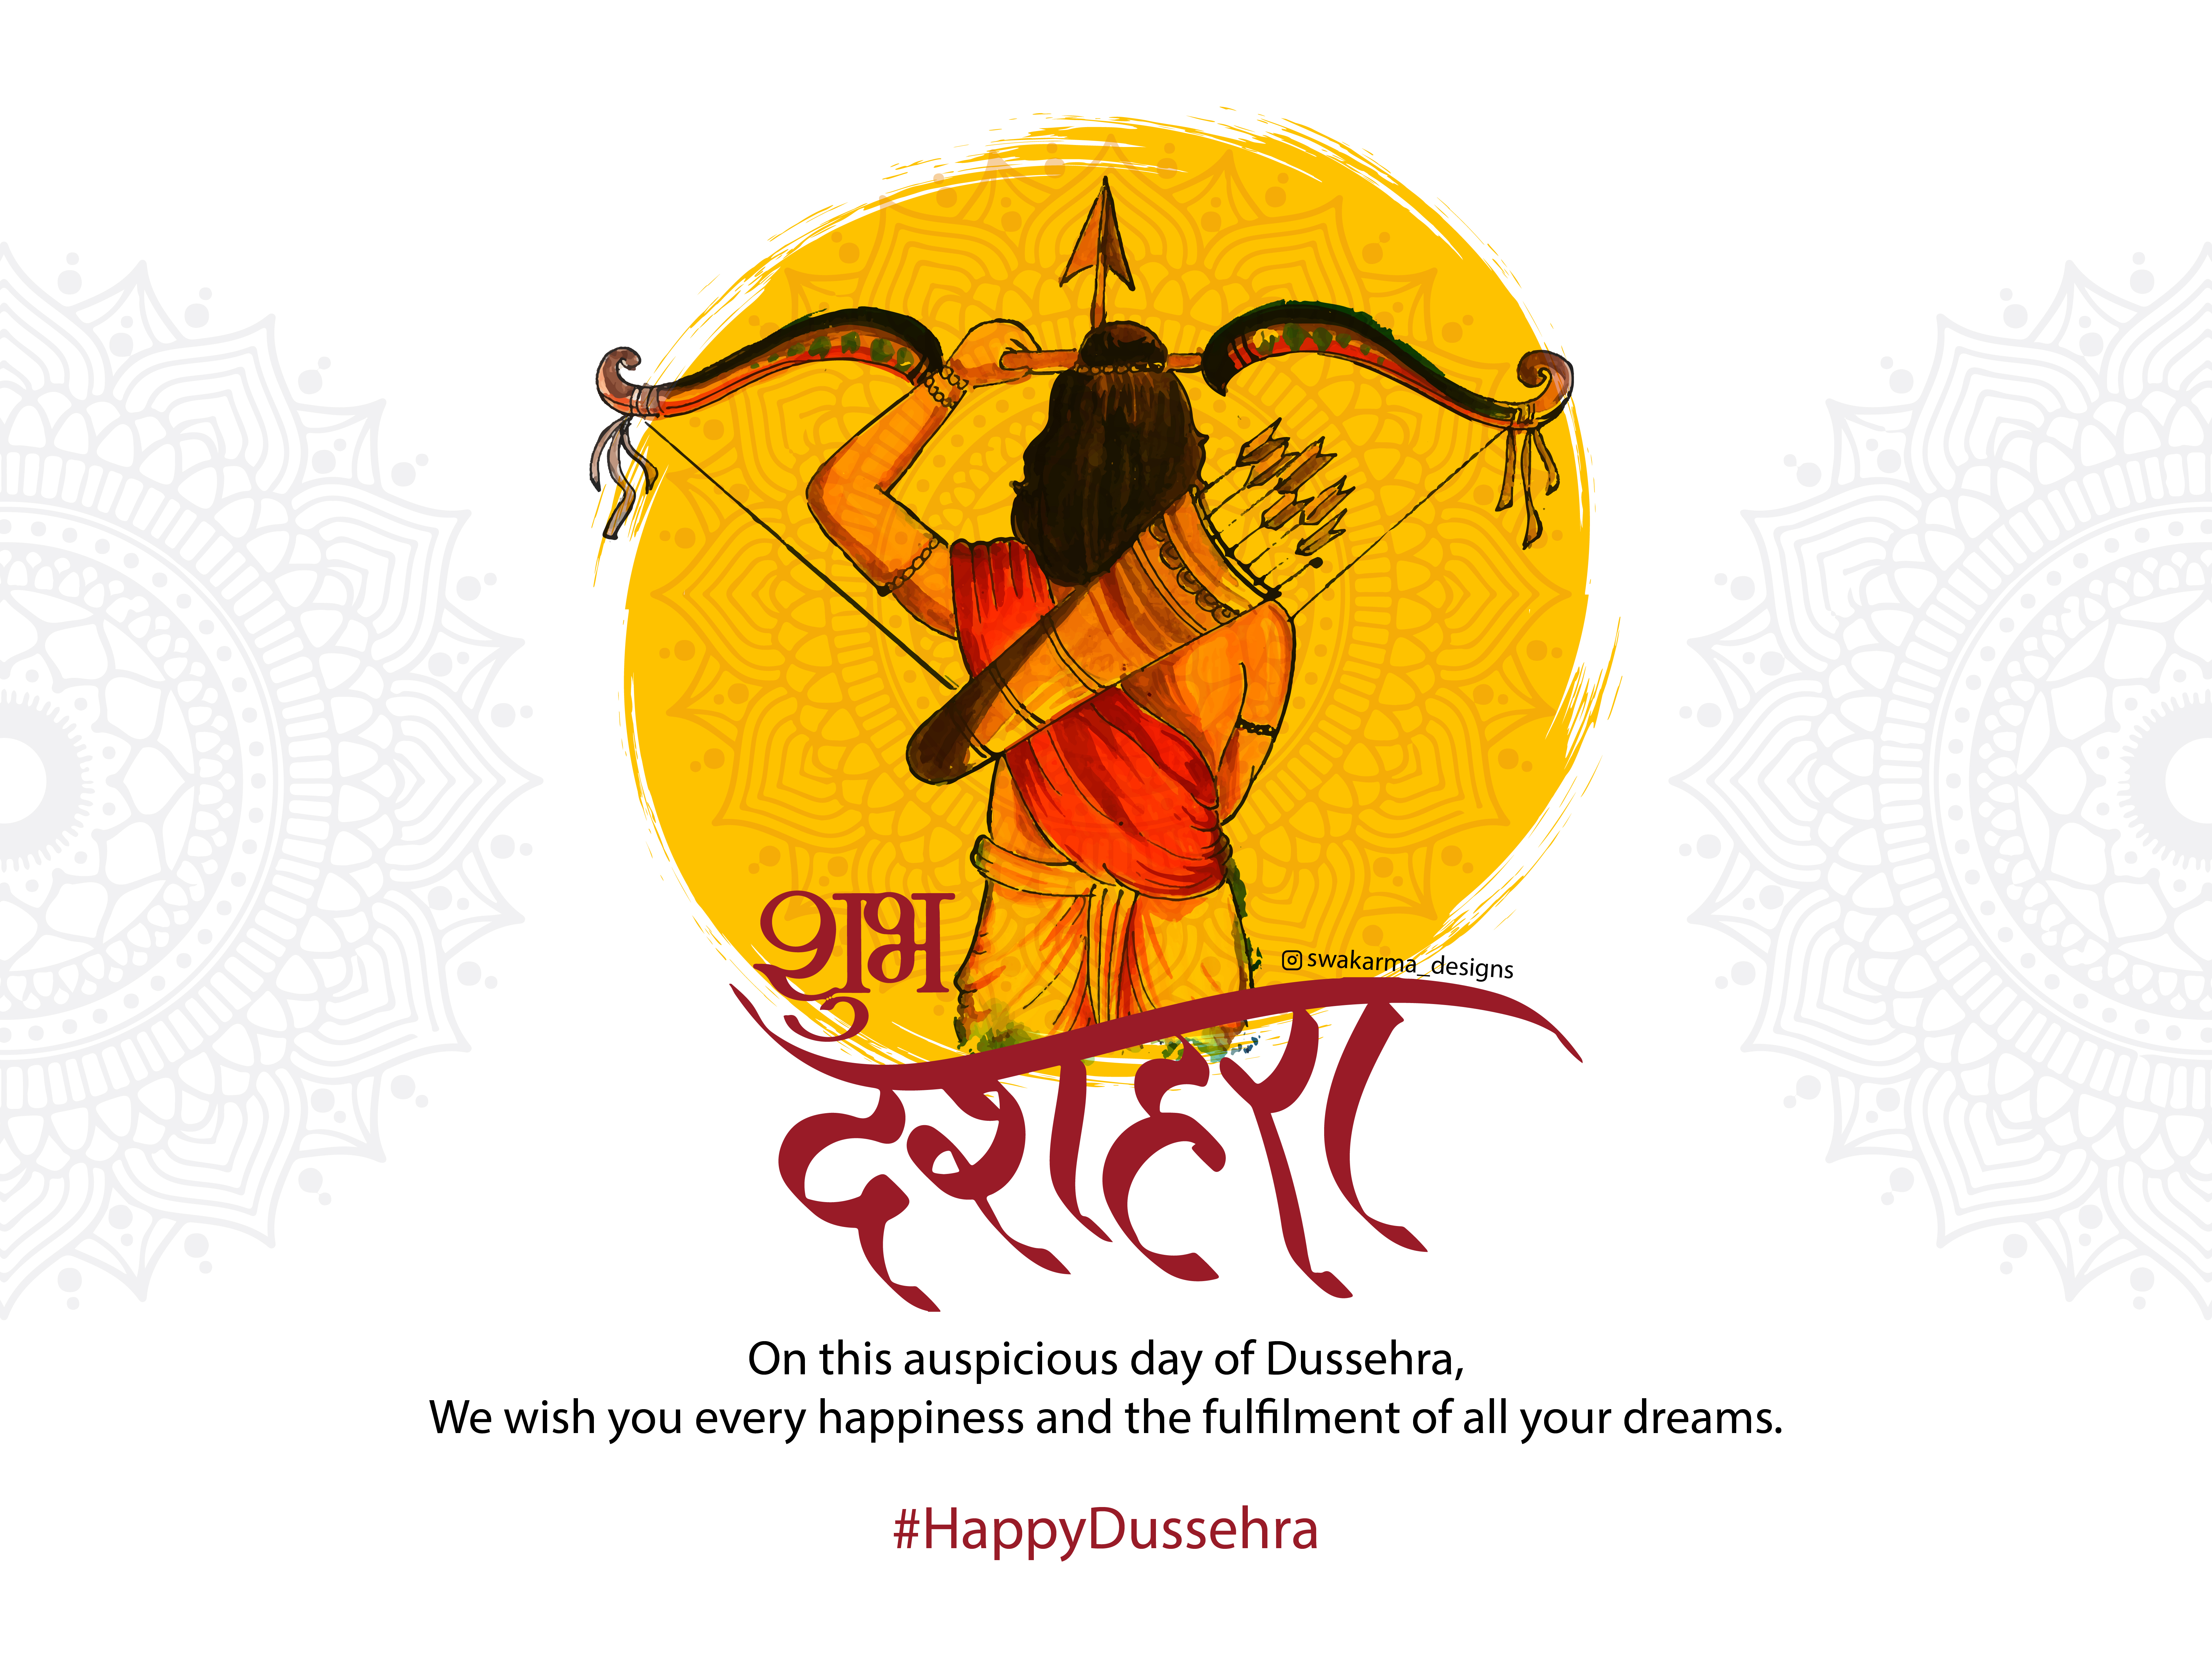 Happy Dussehra 2021: Wishes, Messages, Quotes, WhatsApp Status and Images  to share with your near and dear ones - India Today